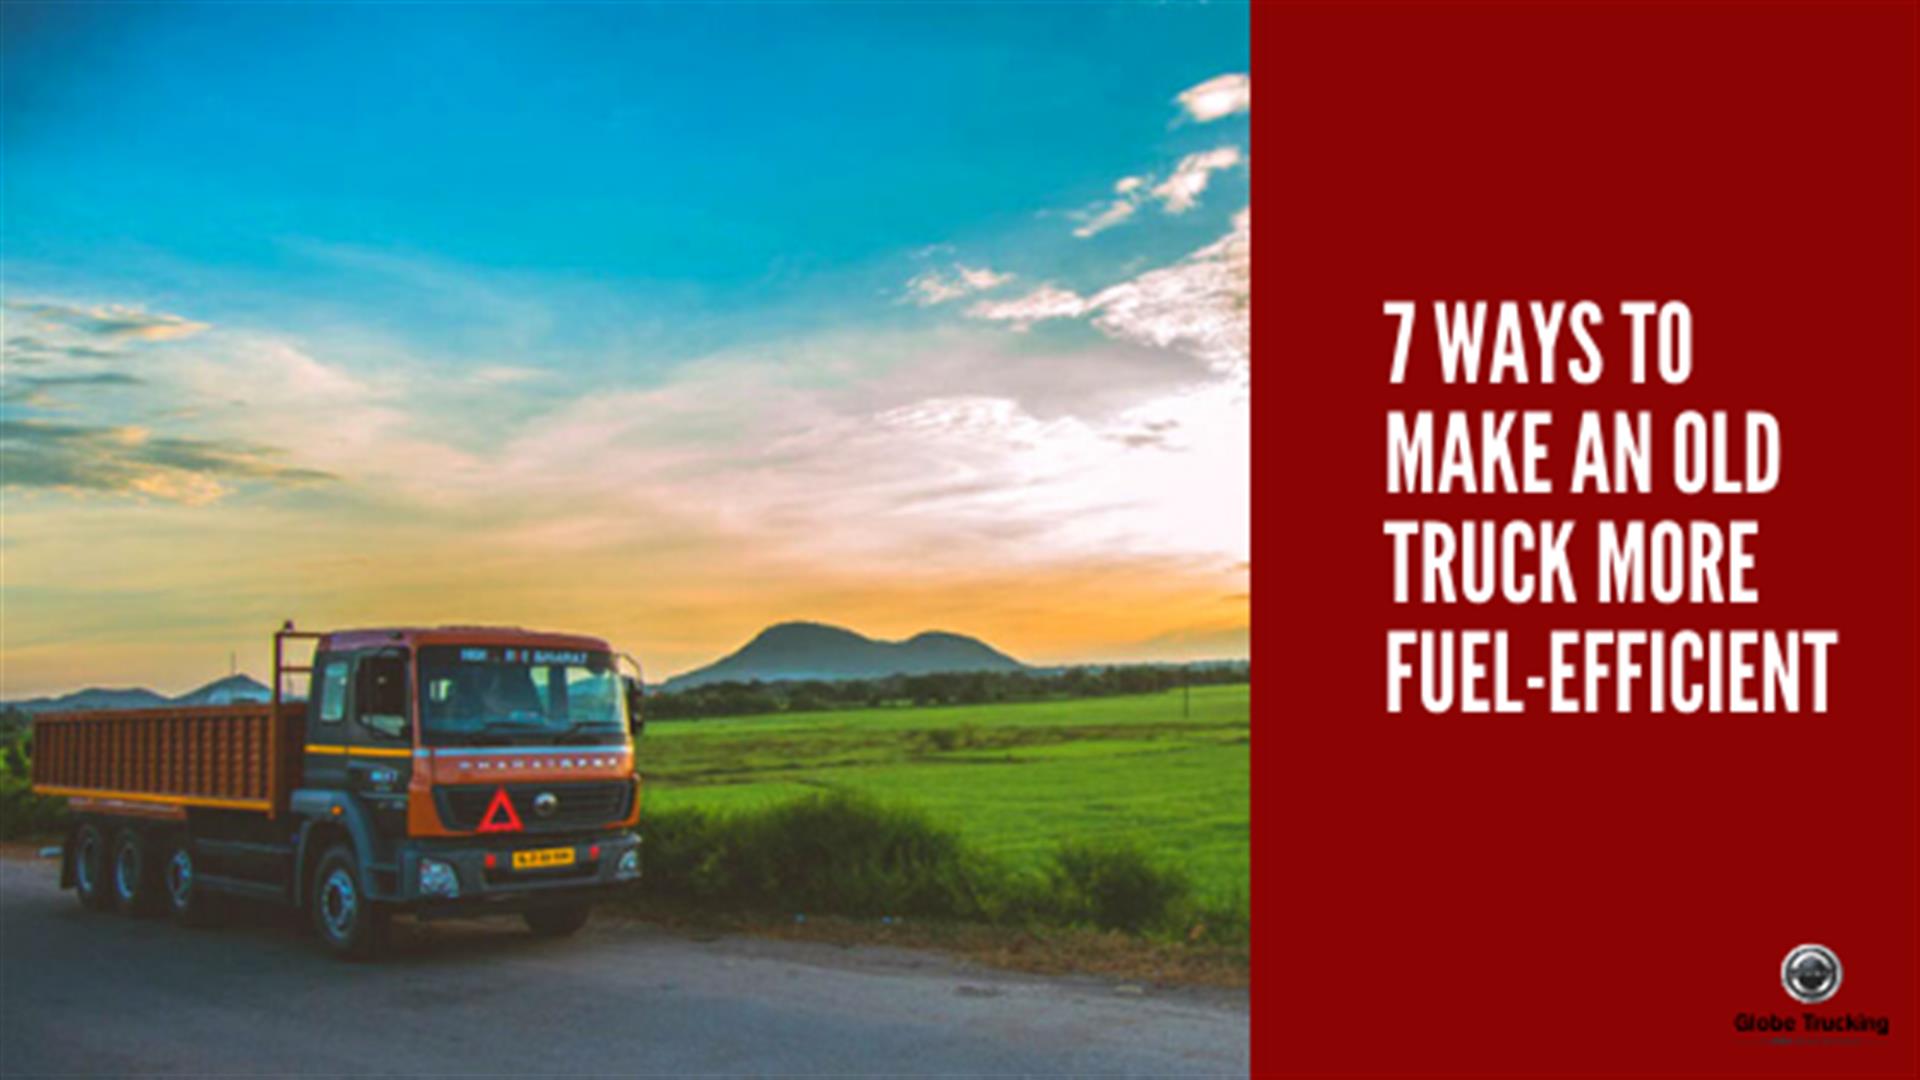 7 Ways To Make An Old Truck More Fuel-Efficient